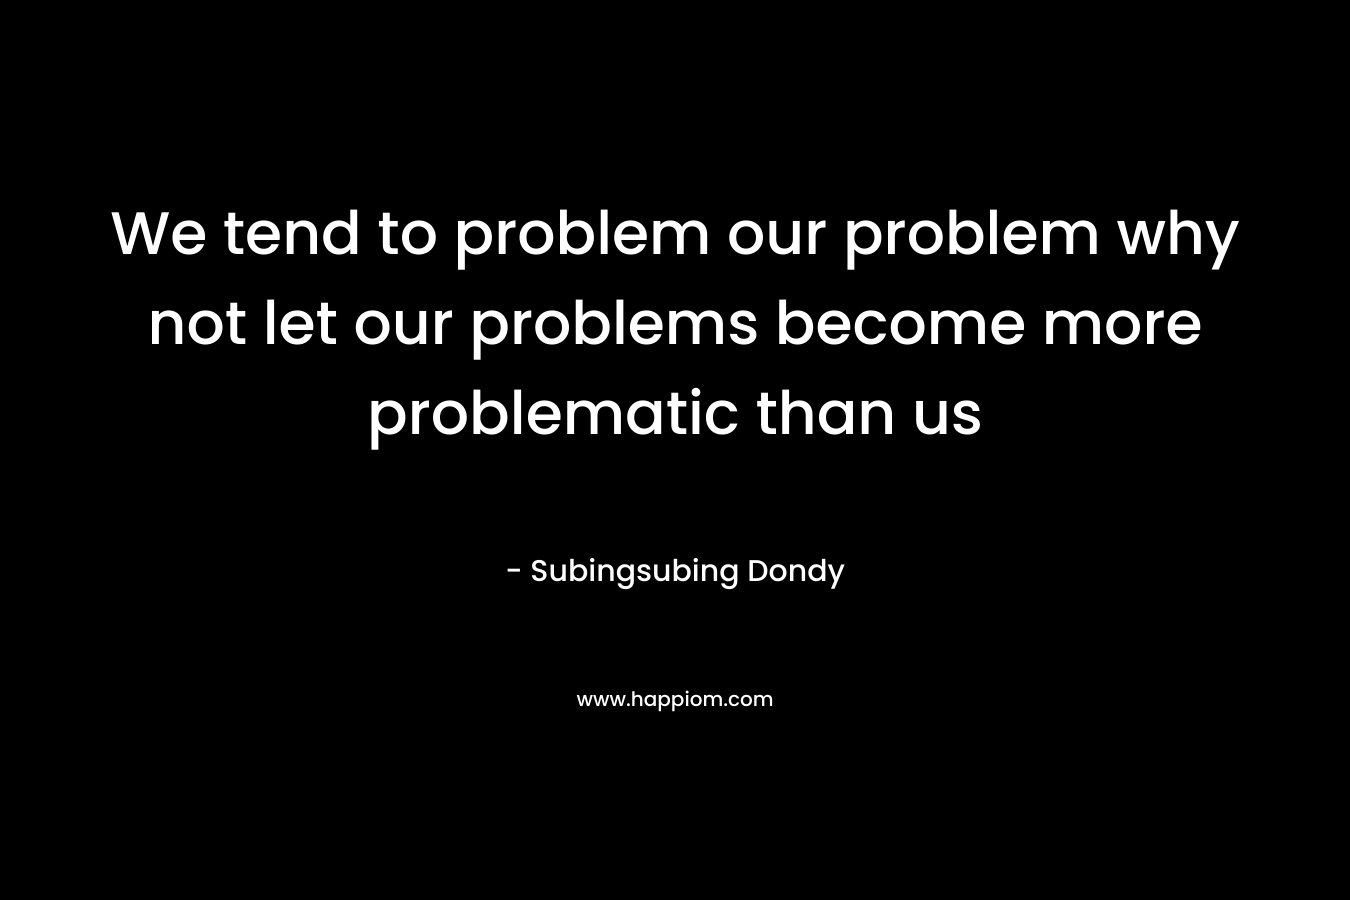 We tend to problem our problem why not let our problems become more problematic than us – Subingsubing Dondy